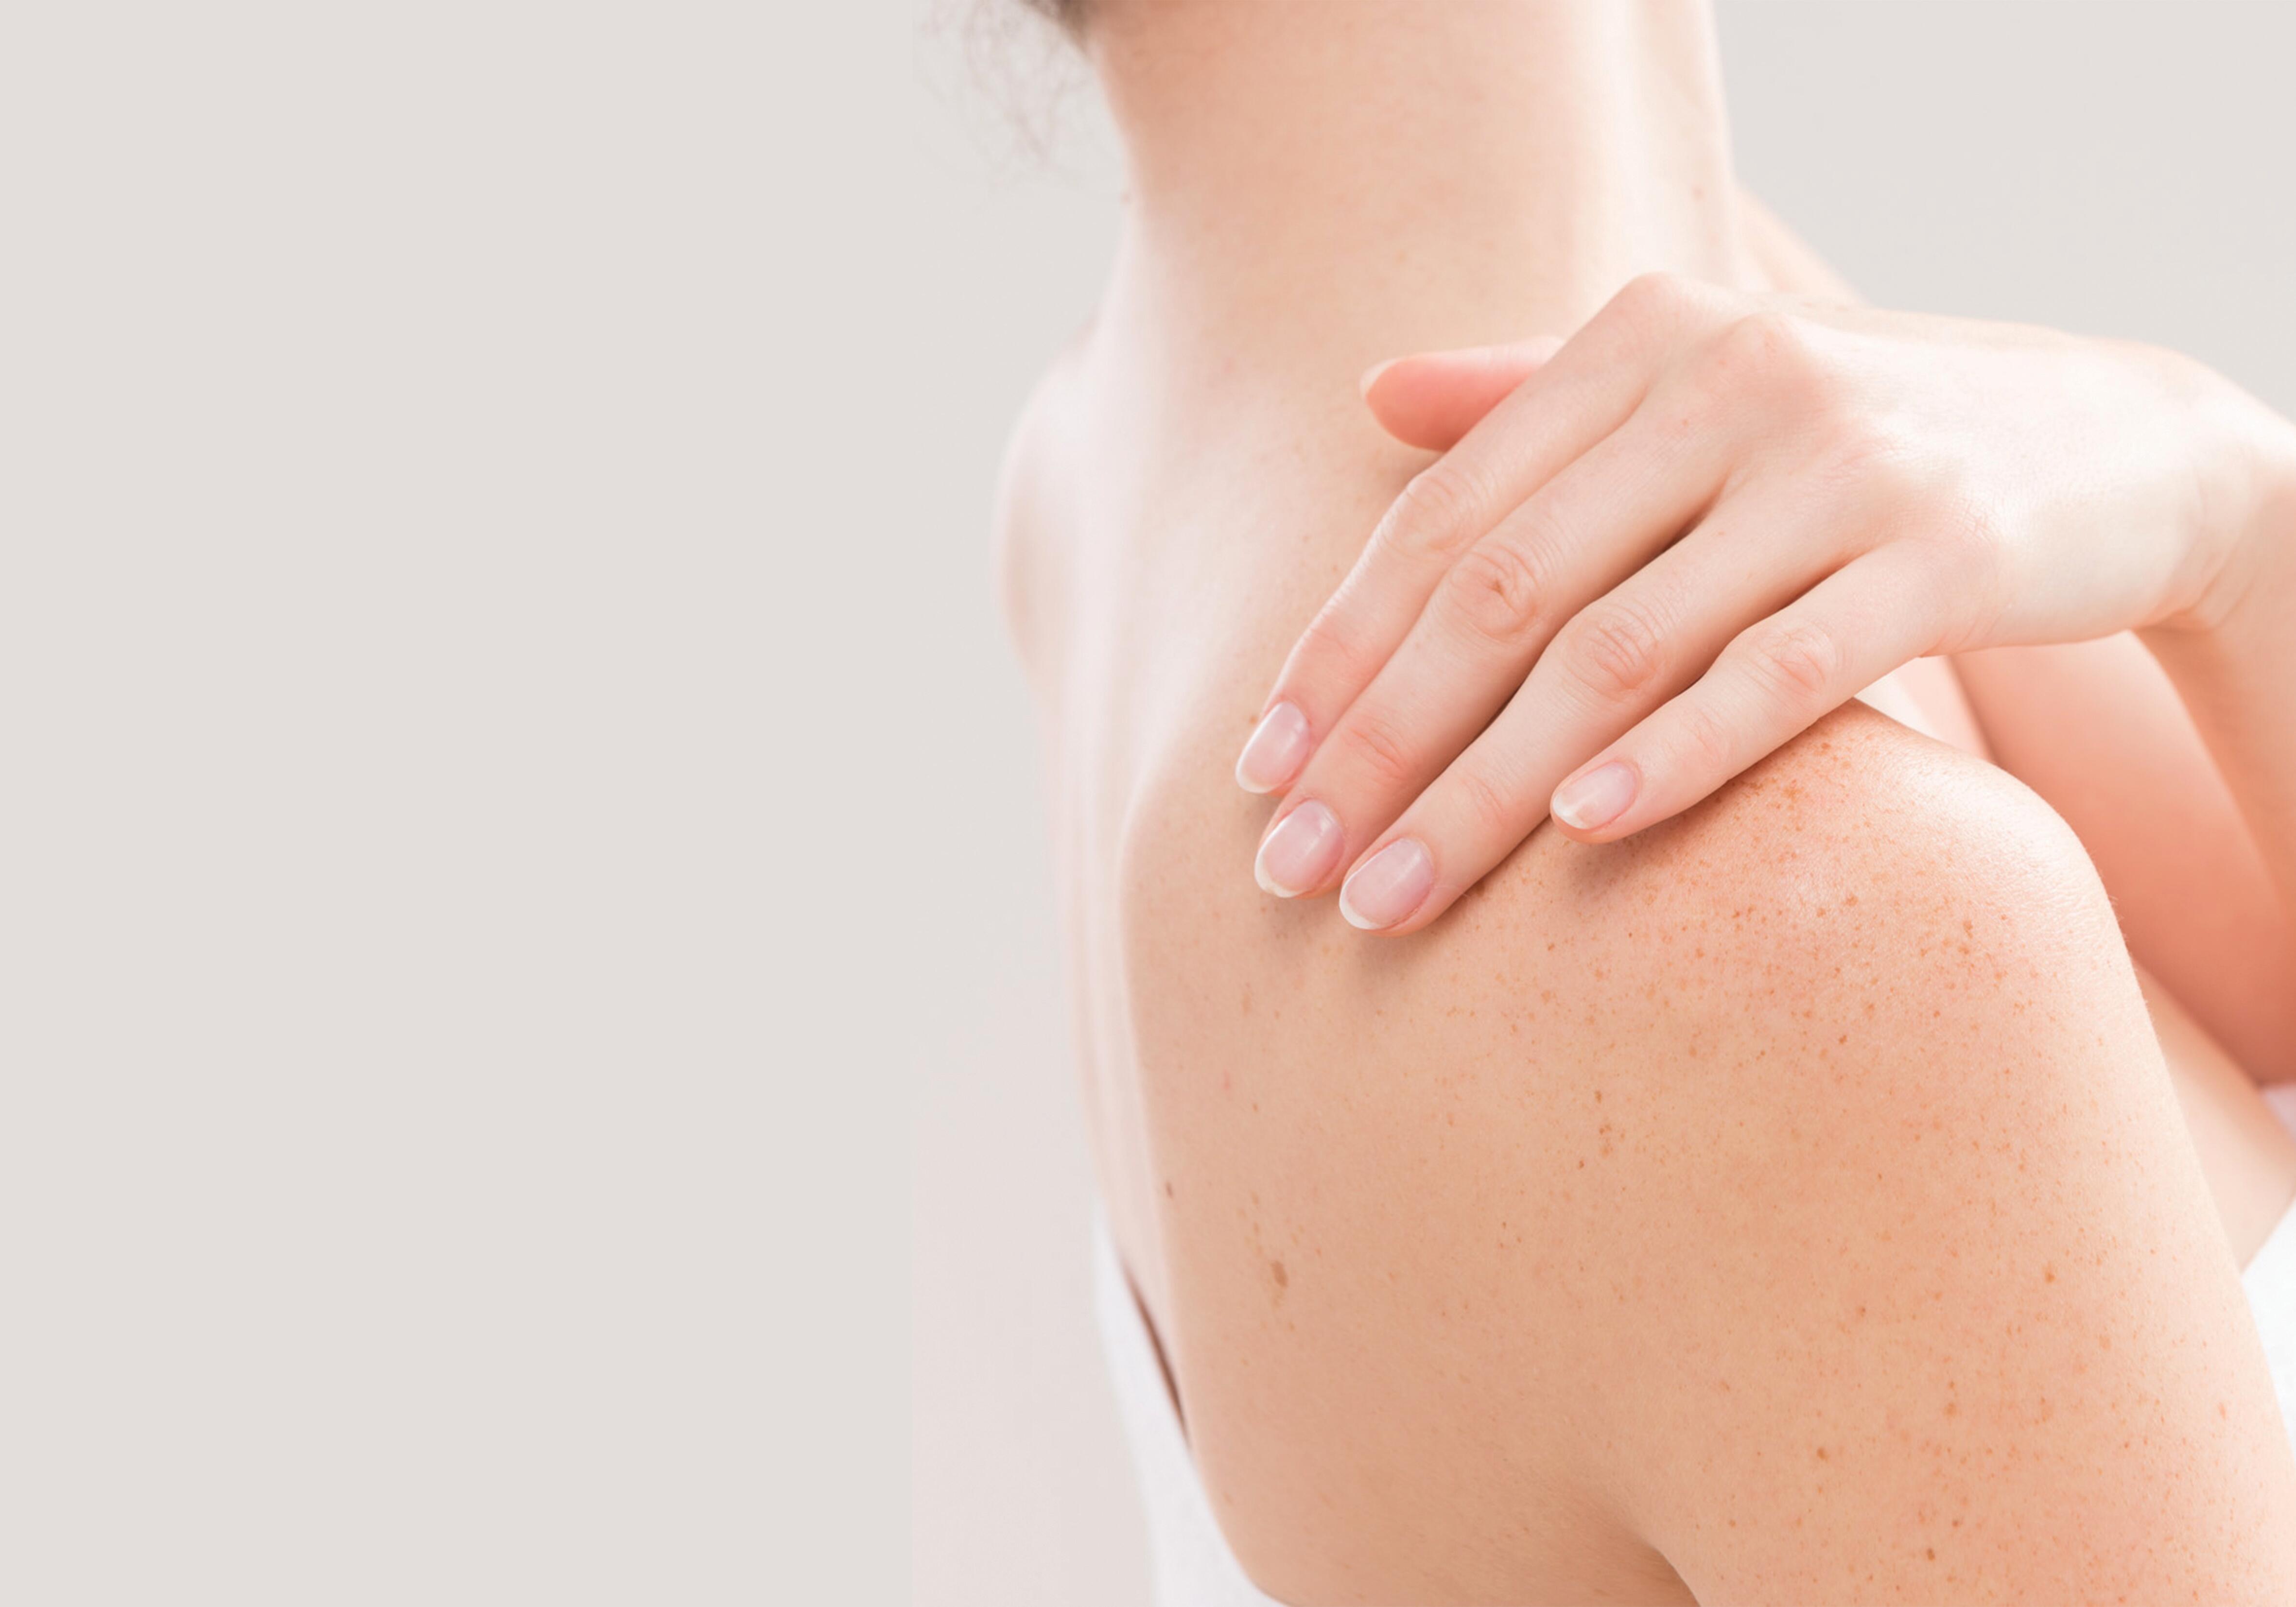 AD_PAINFUL-SKIN_WOMAN-HAND-SHOULDER_LARGE_2021